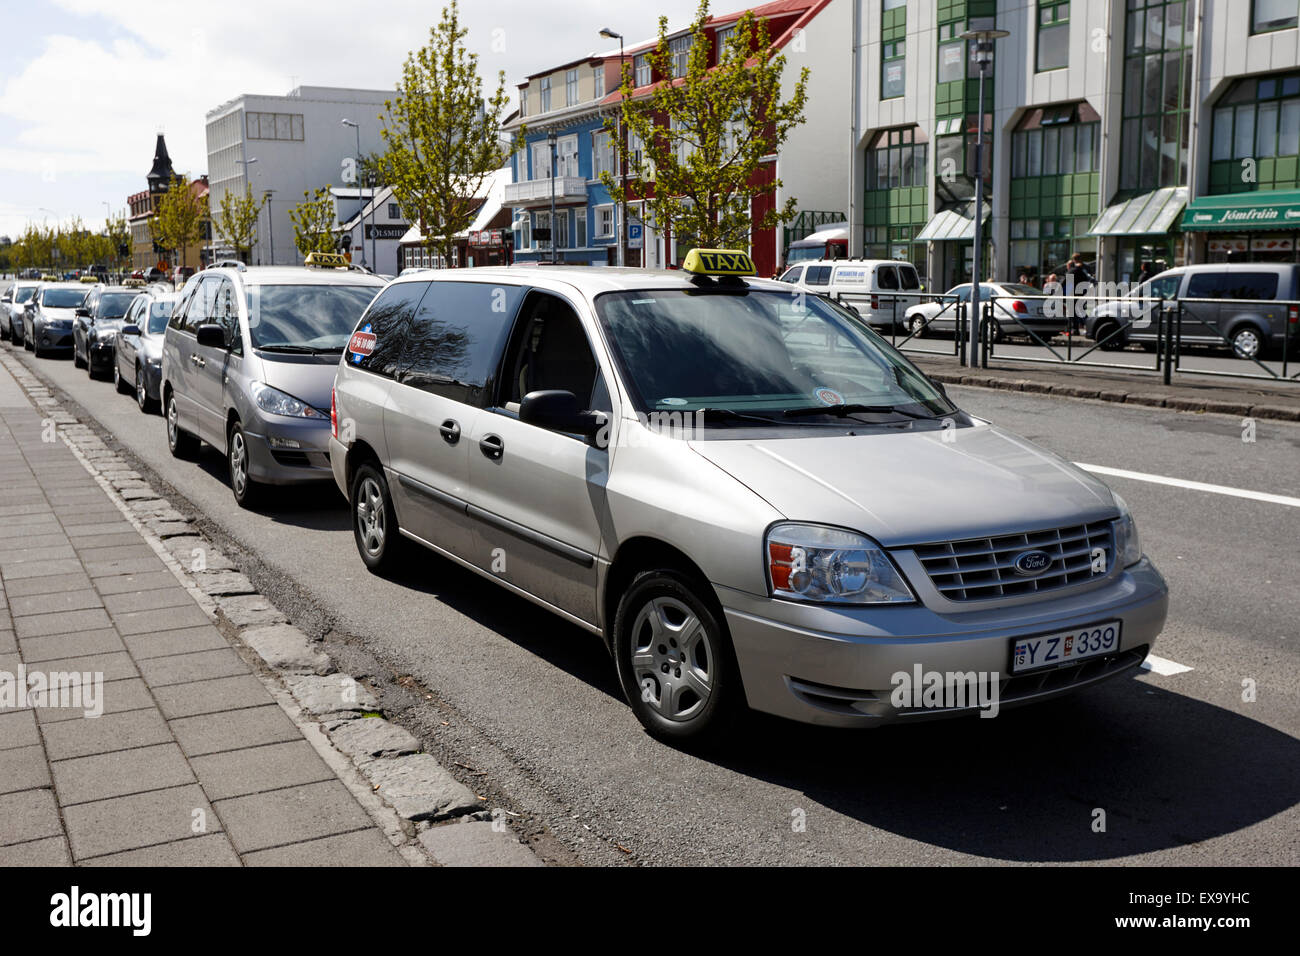 taxi rank in downtown reykjavik iceland Stock Photo